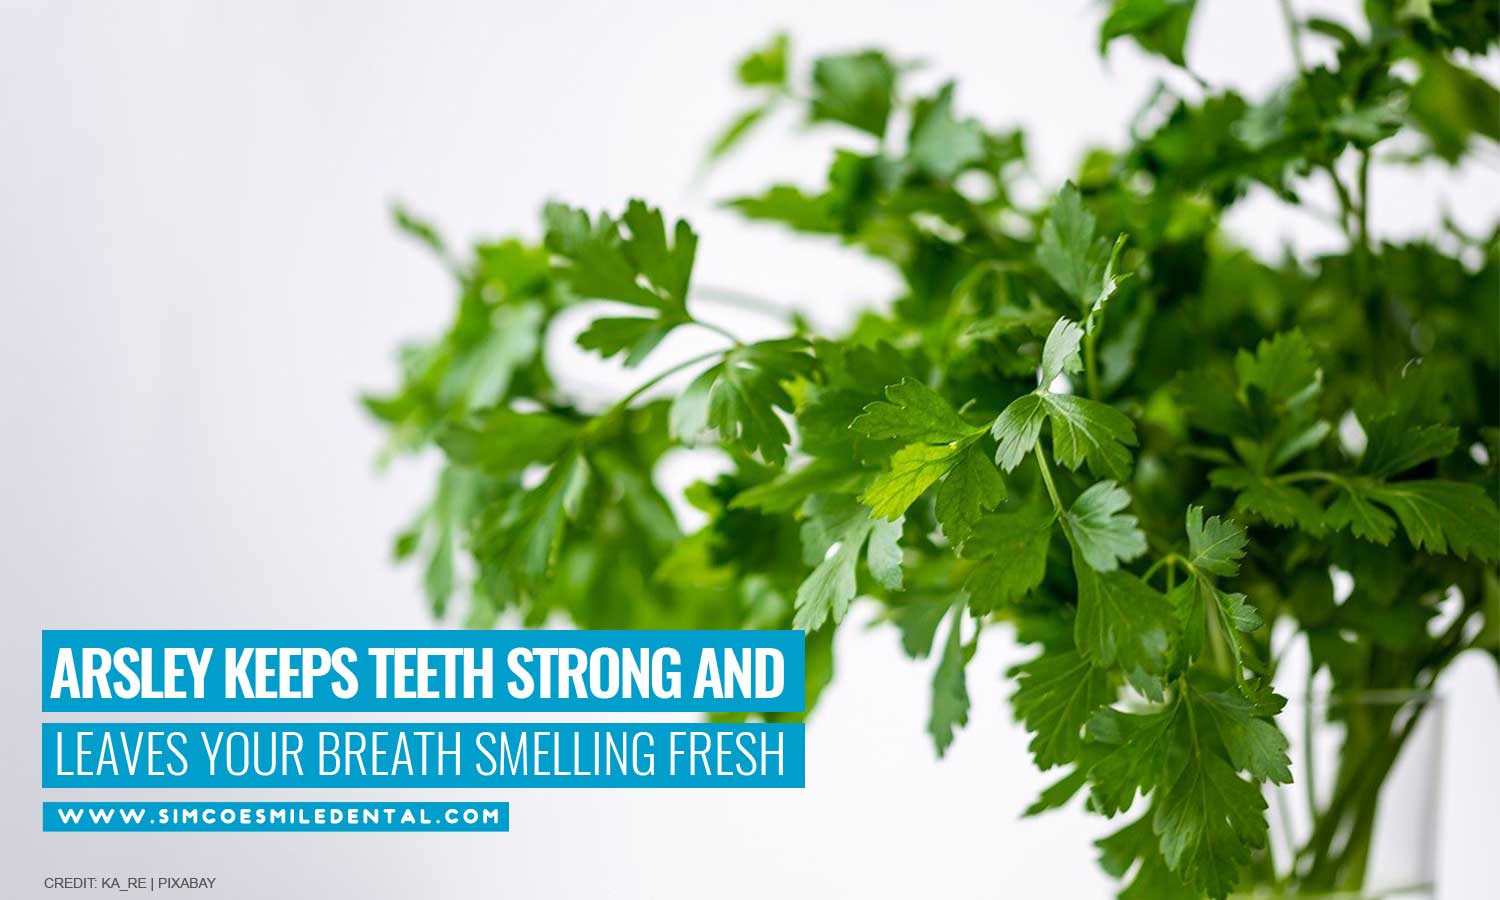 Parsley keeps teeth strong and leaves your breath smelling fresh